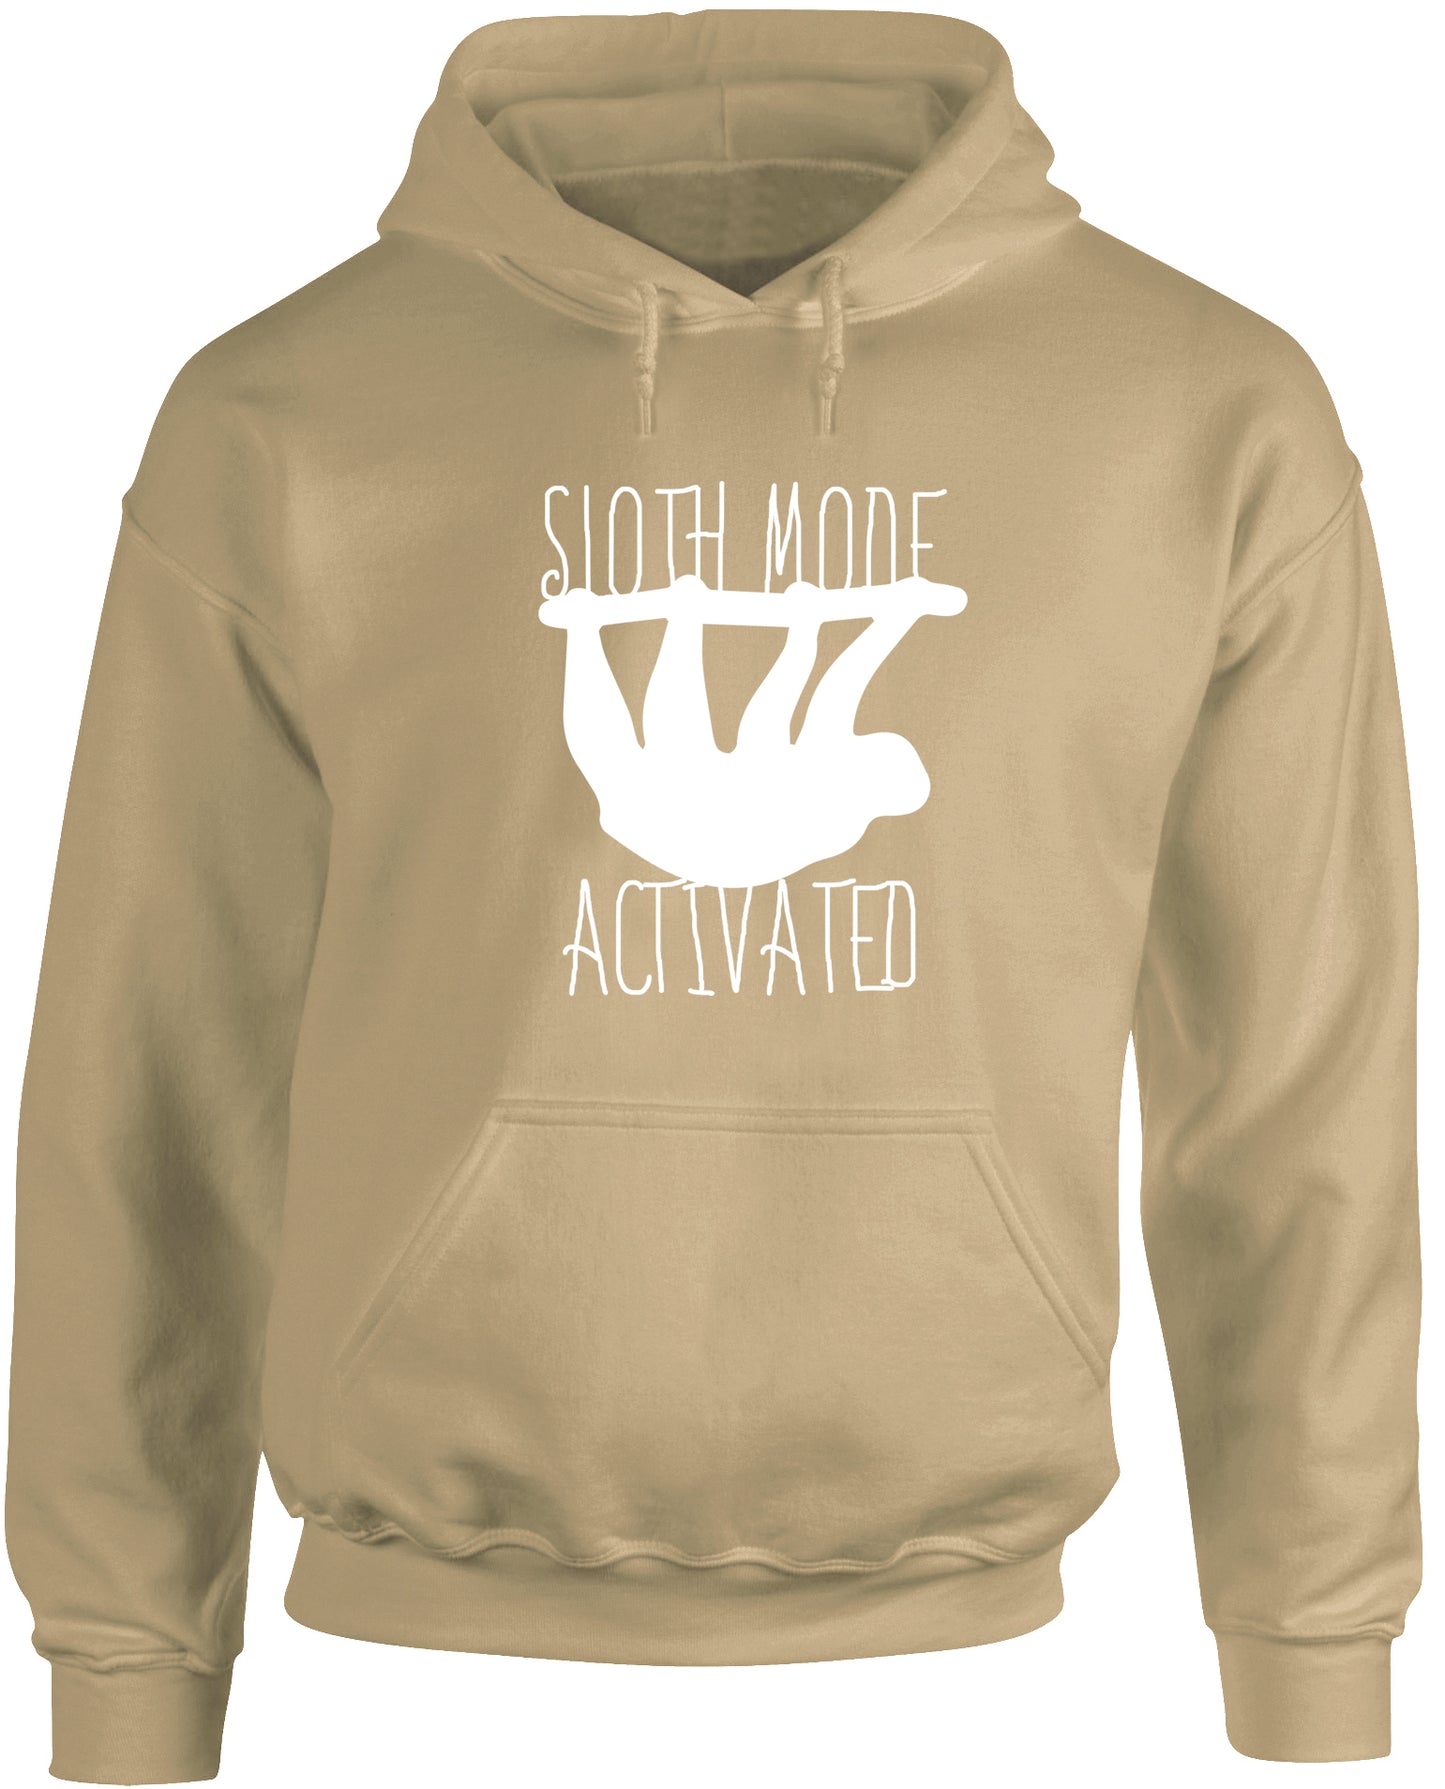 Sloth mode activated unisex Hoodie hooded top